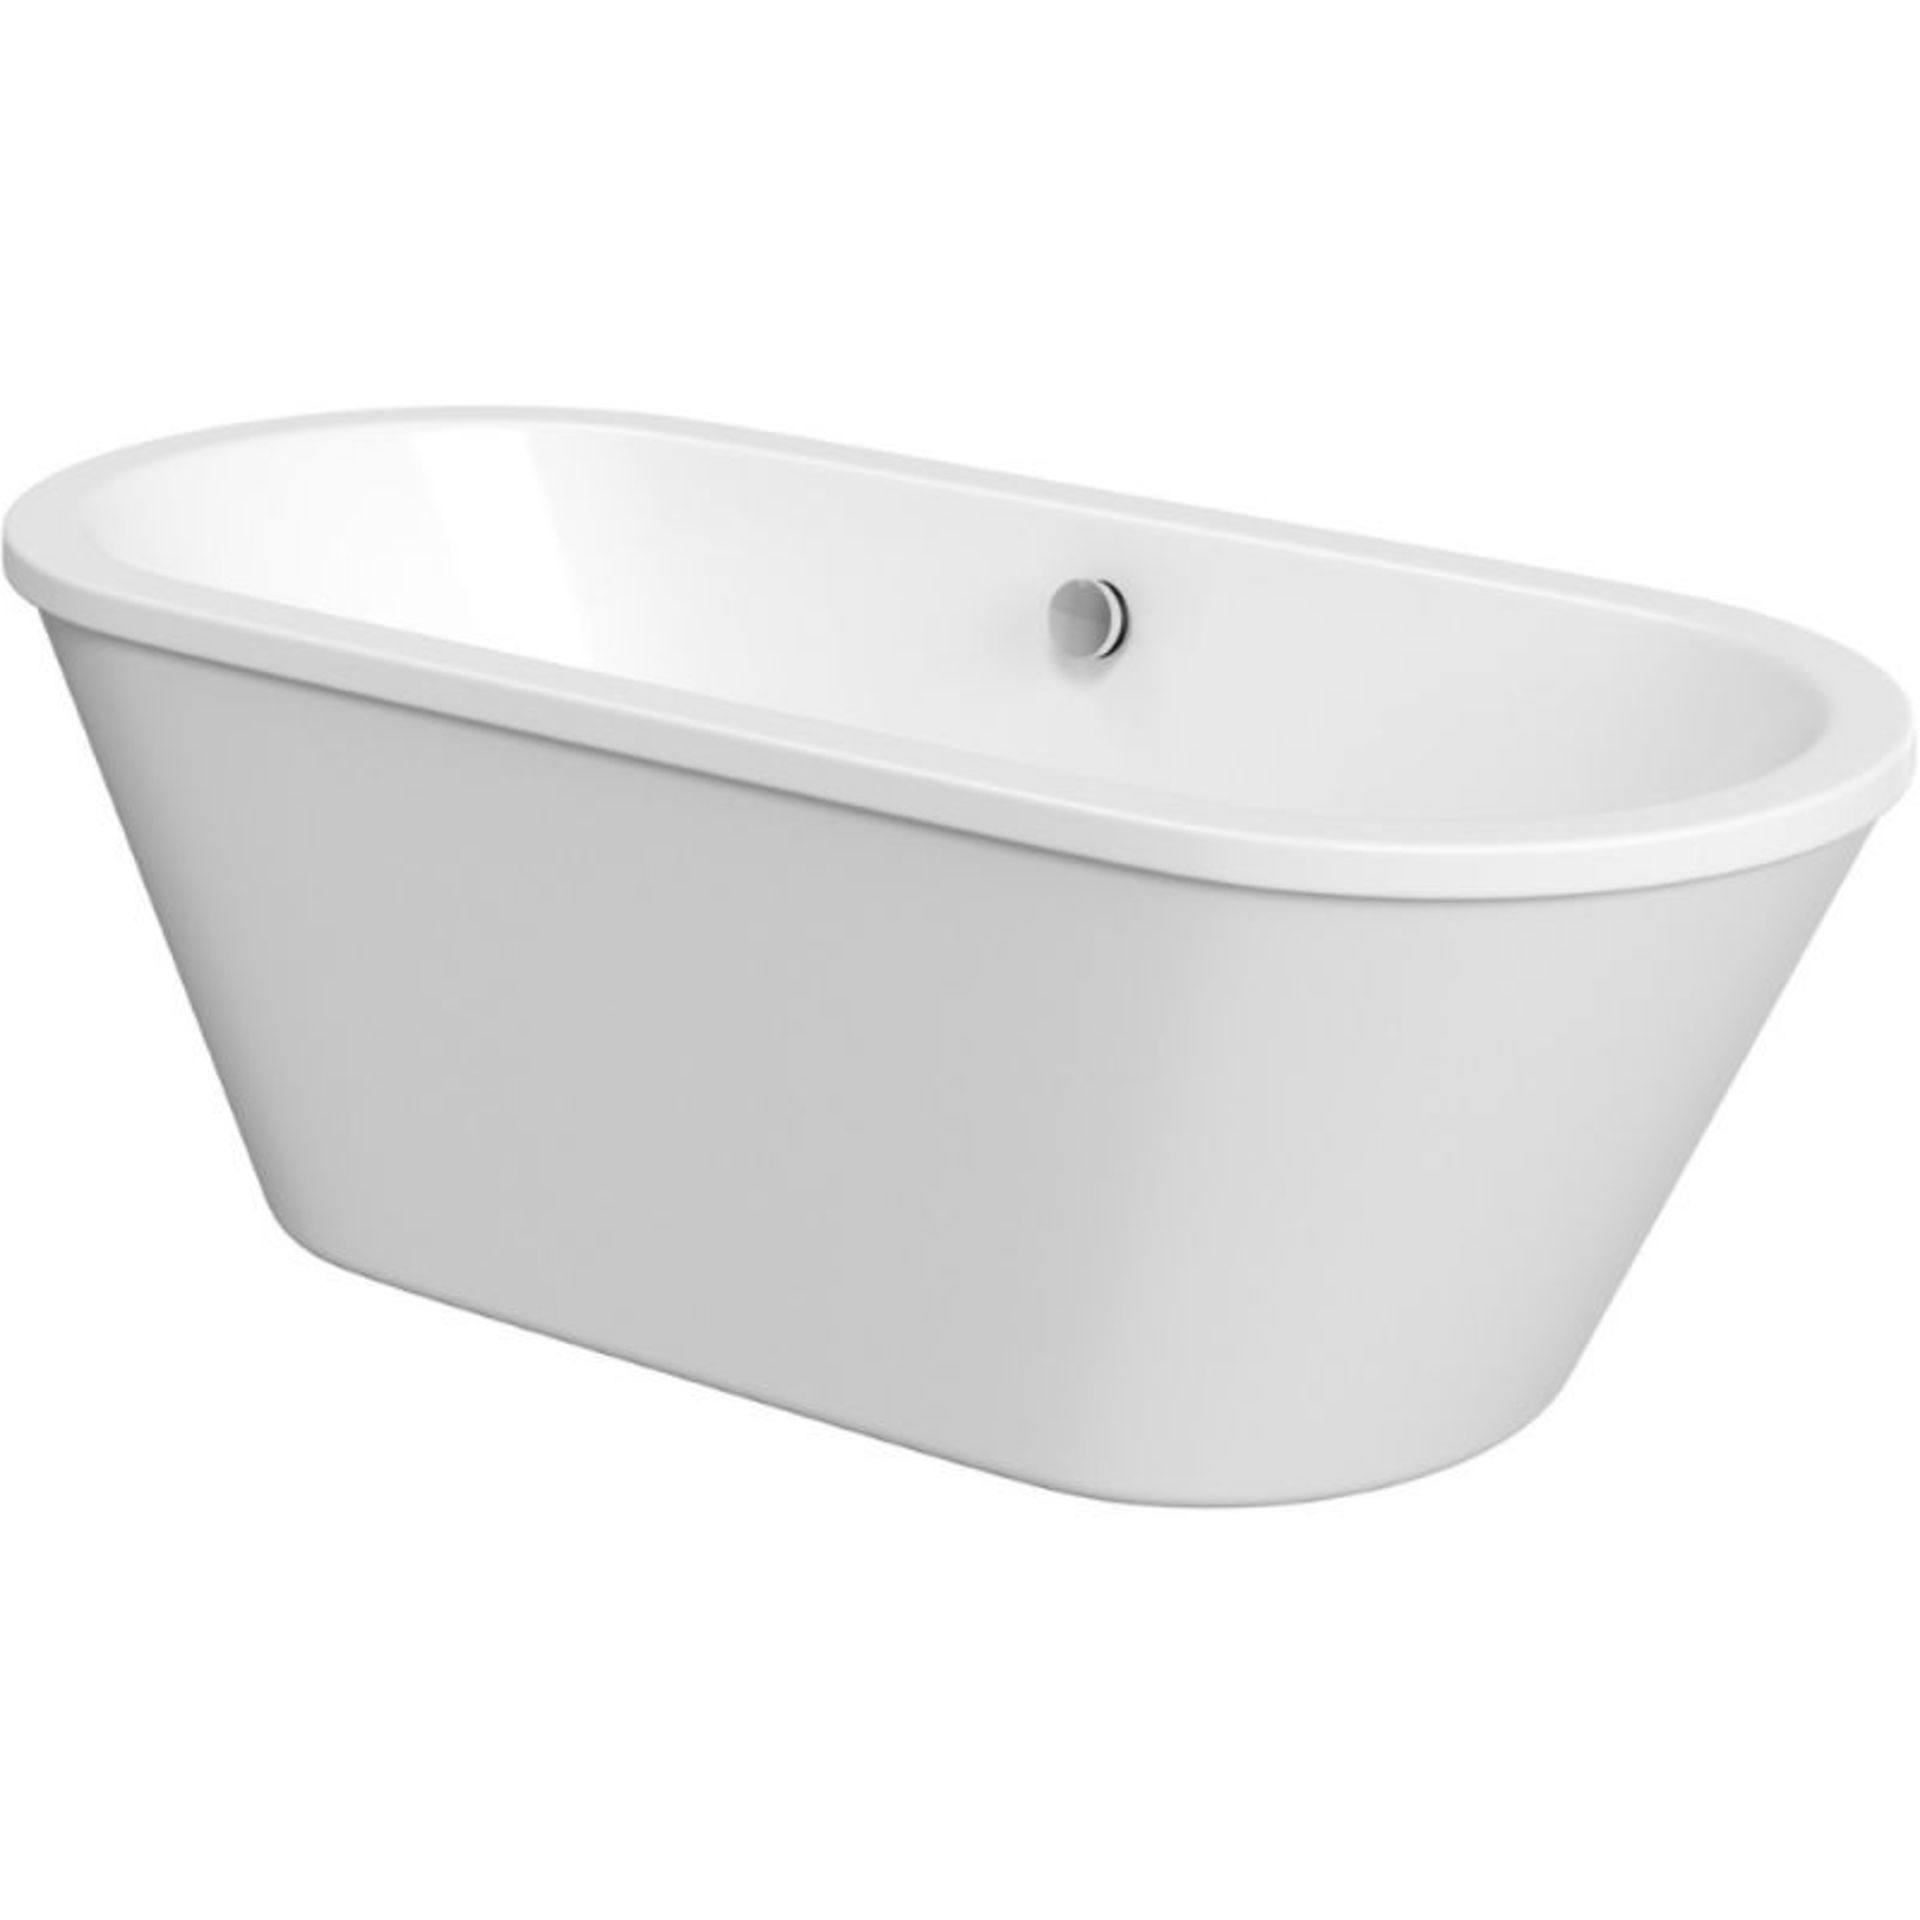 New (J1) Savoy 1700mmx755mm Double Ended White Freestanding Bath. RRP £2,499.The Savoy Doubl... - Image 2 of 2